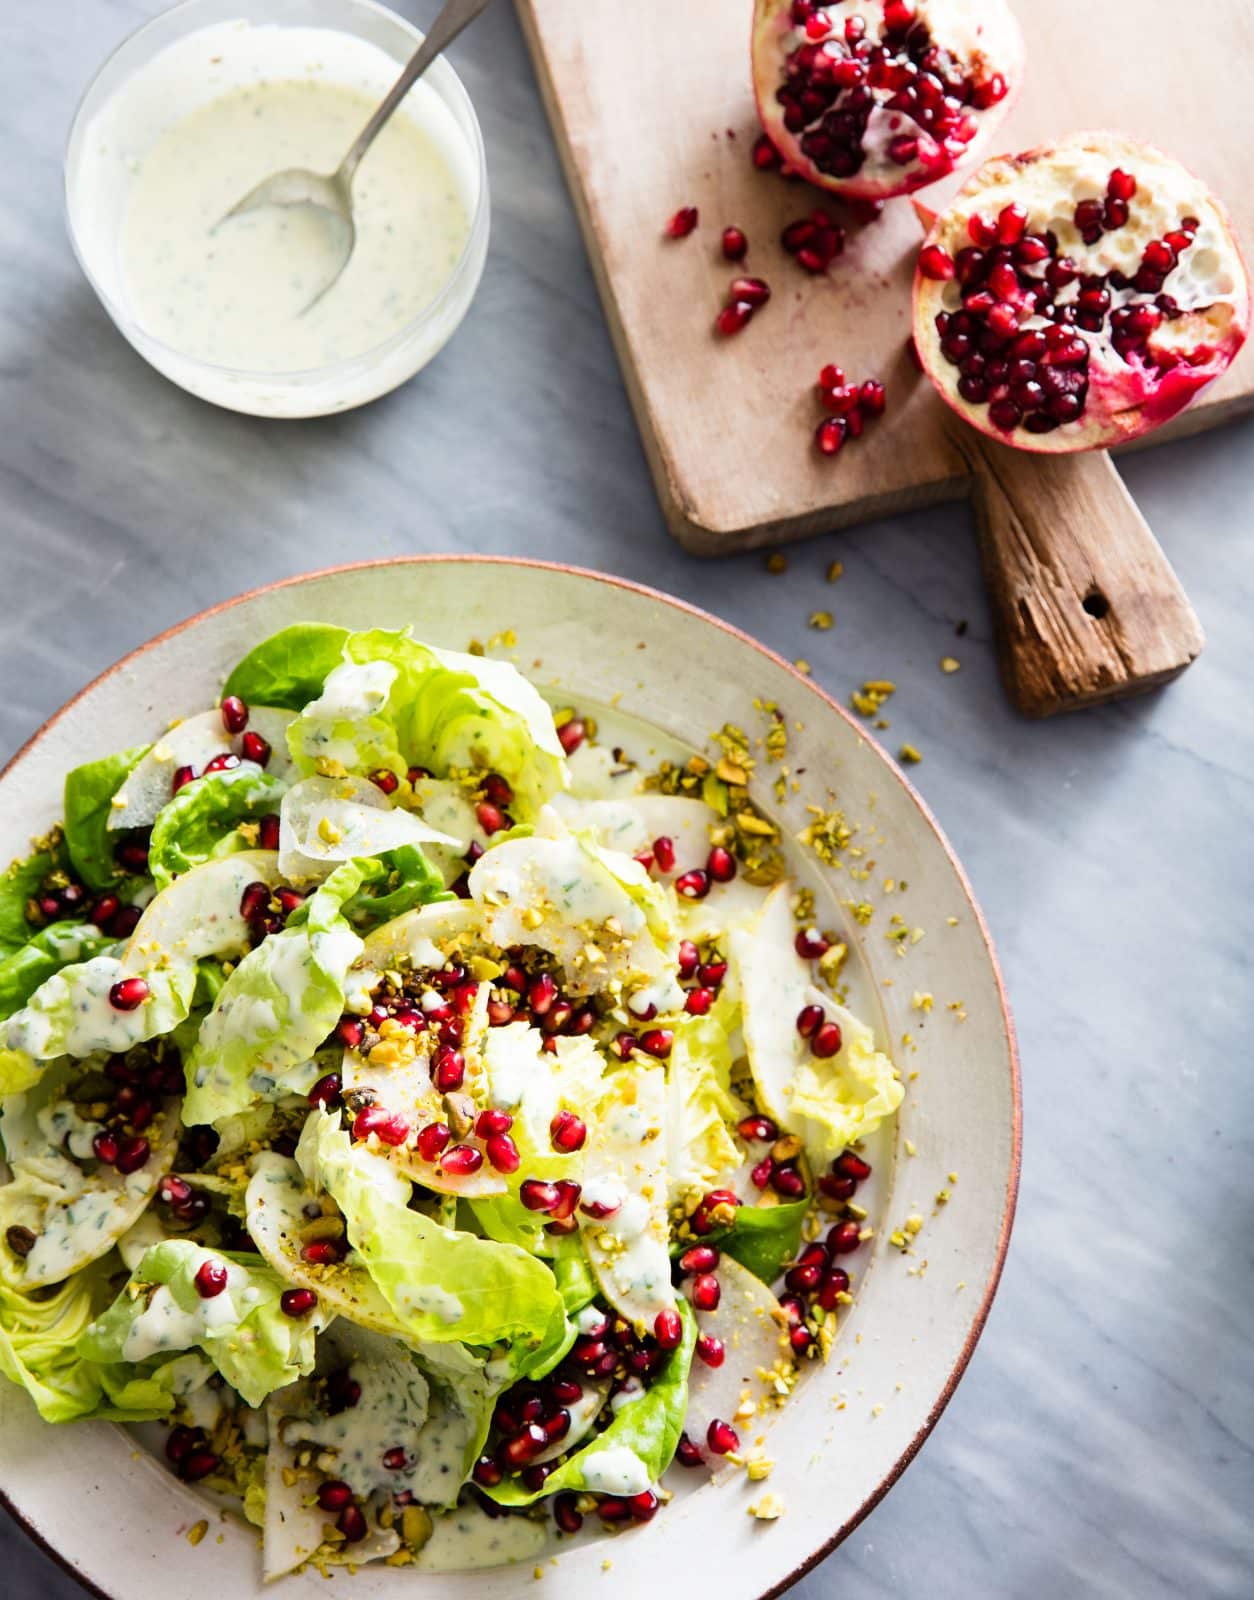 butter lettuce salad next to pomegranates on a wood board and a white sauce with a spoon